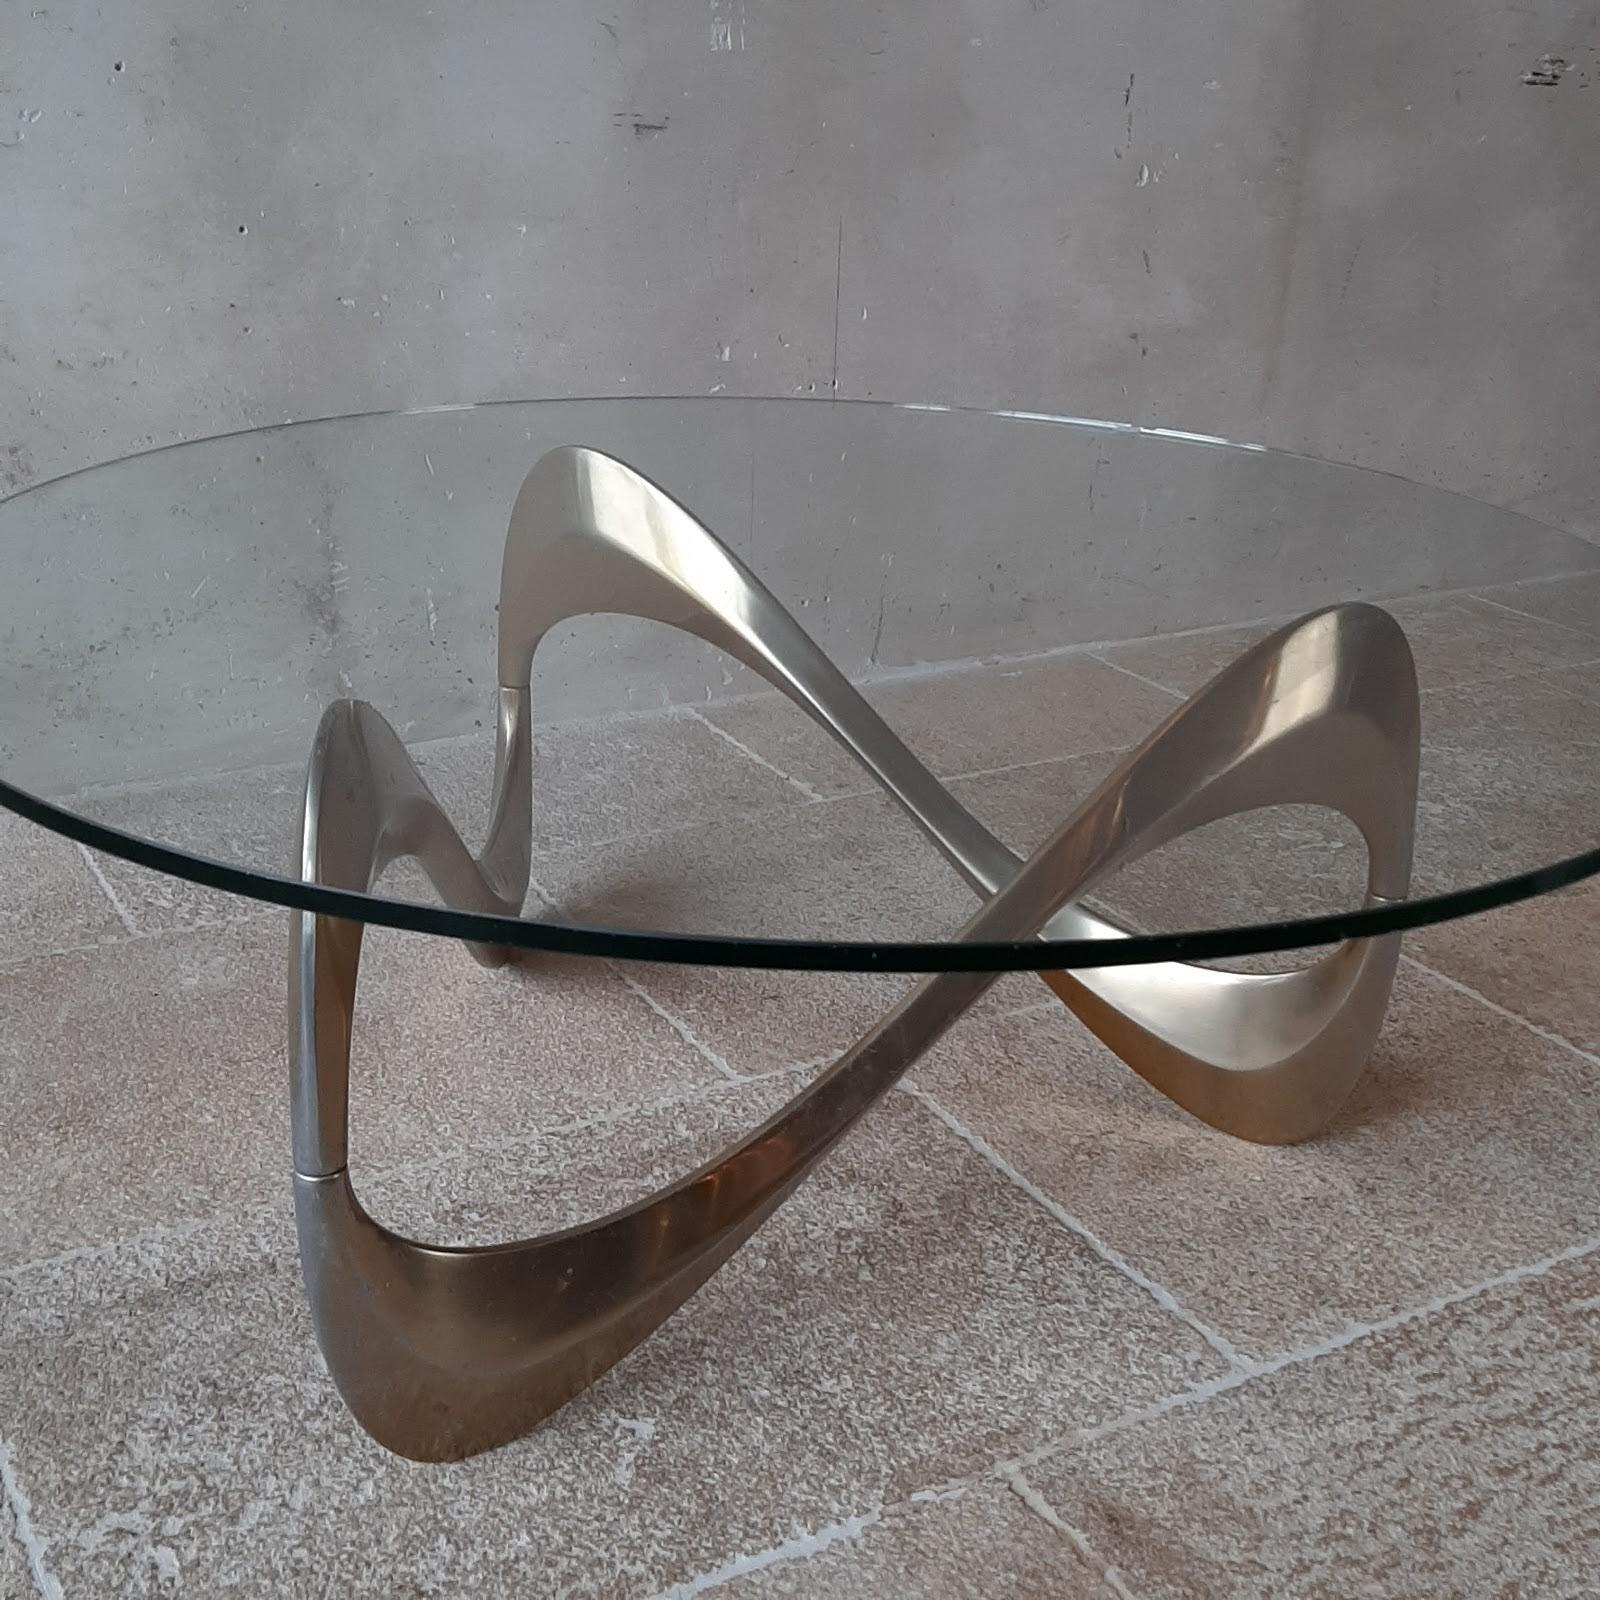 Mid-Century Modern Midcentury Aluminum and Glass Coffee Table by Knut Hesterberg from the 1960s